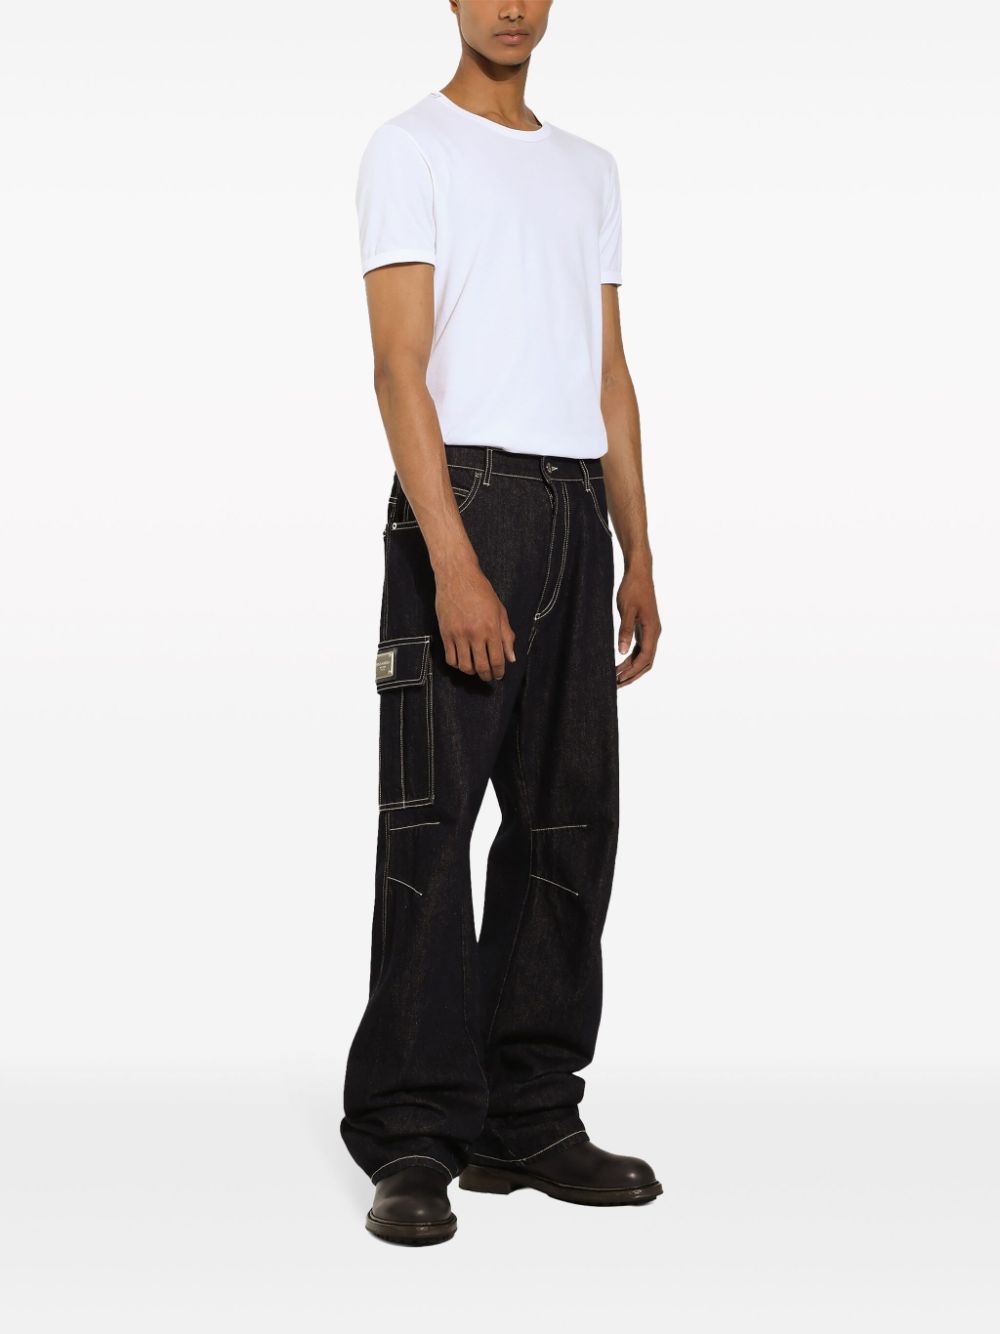 Mid-rise jeans